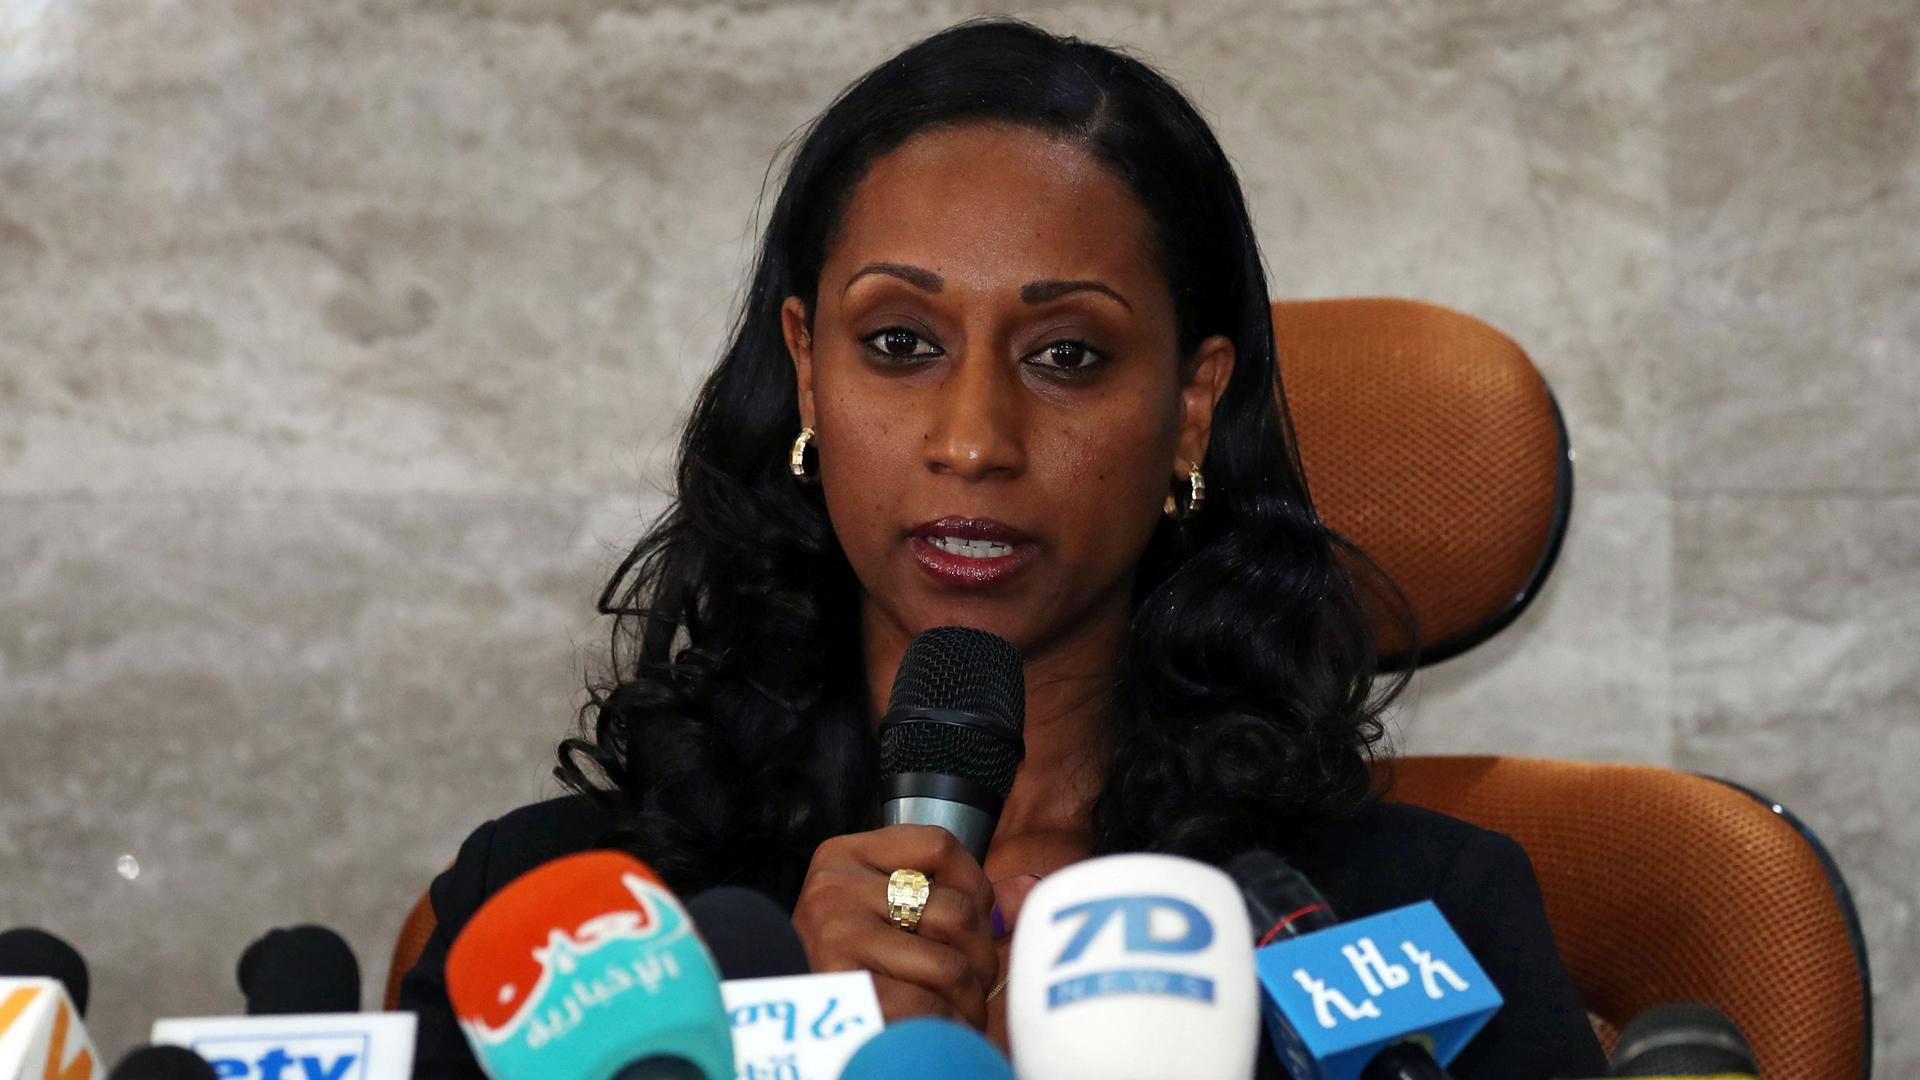 Ethiopian transport minister Dagmawit Moges is shown sitting at a chair behind several microphones.